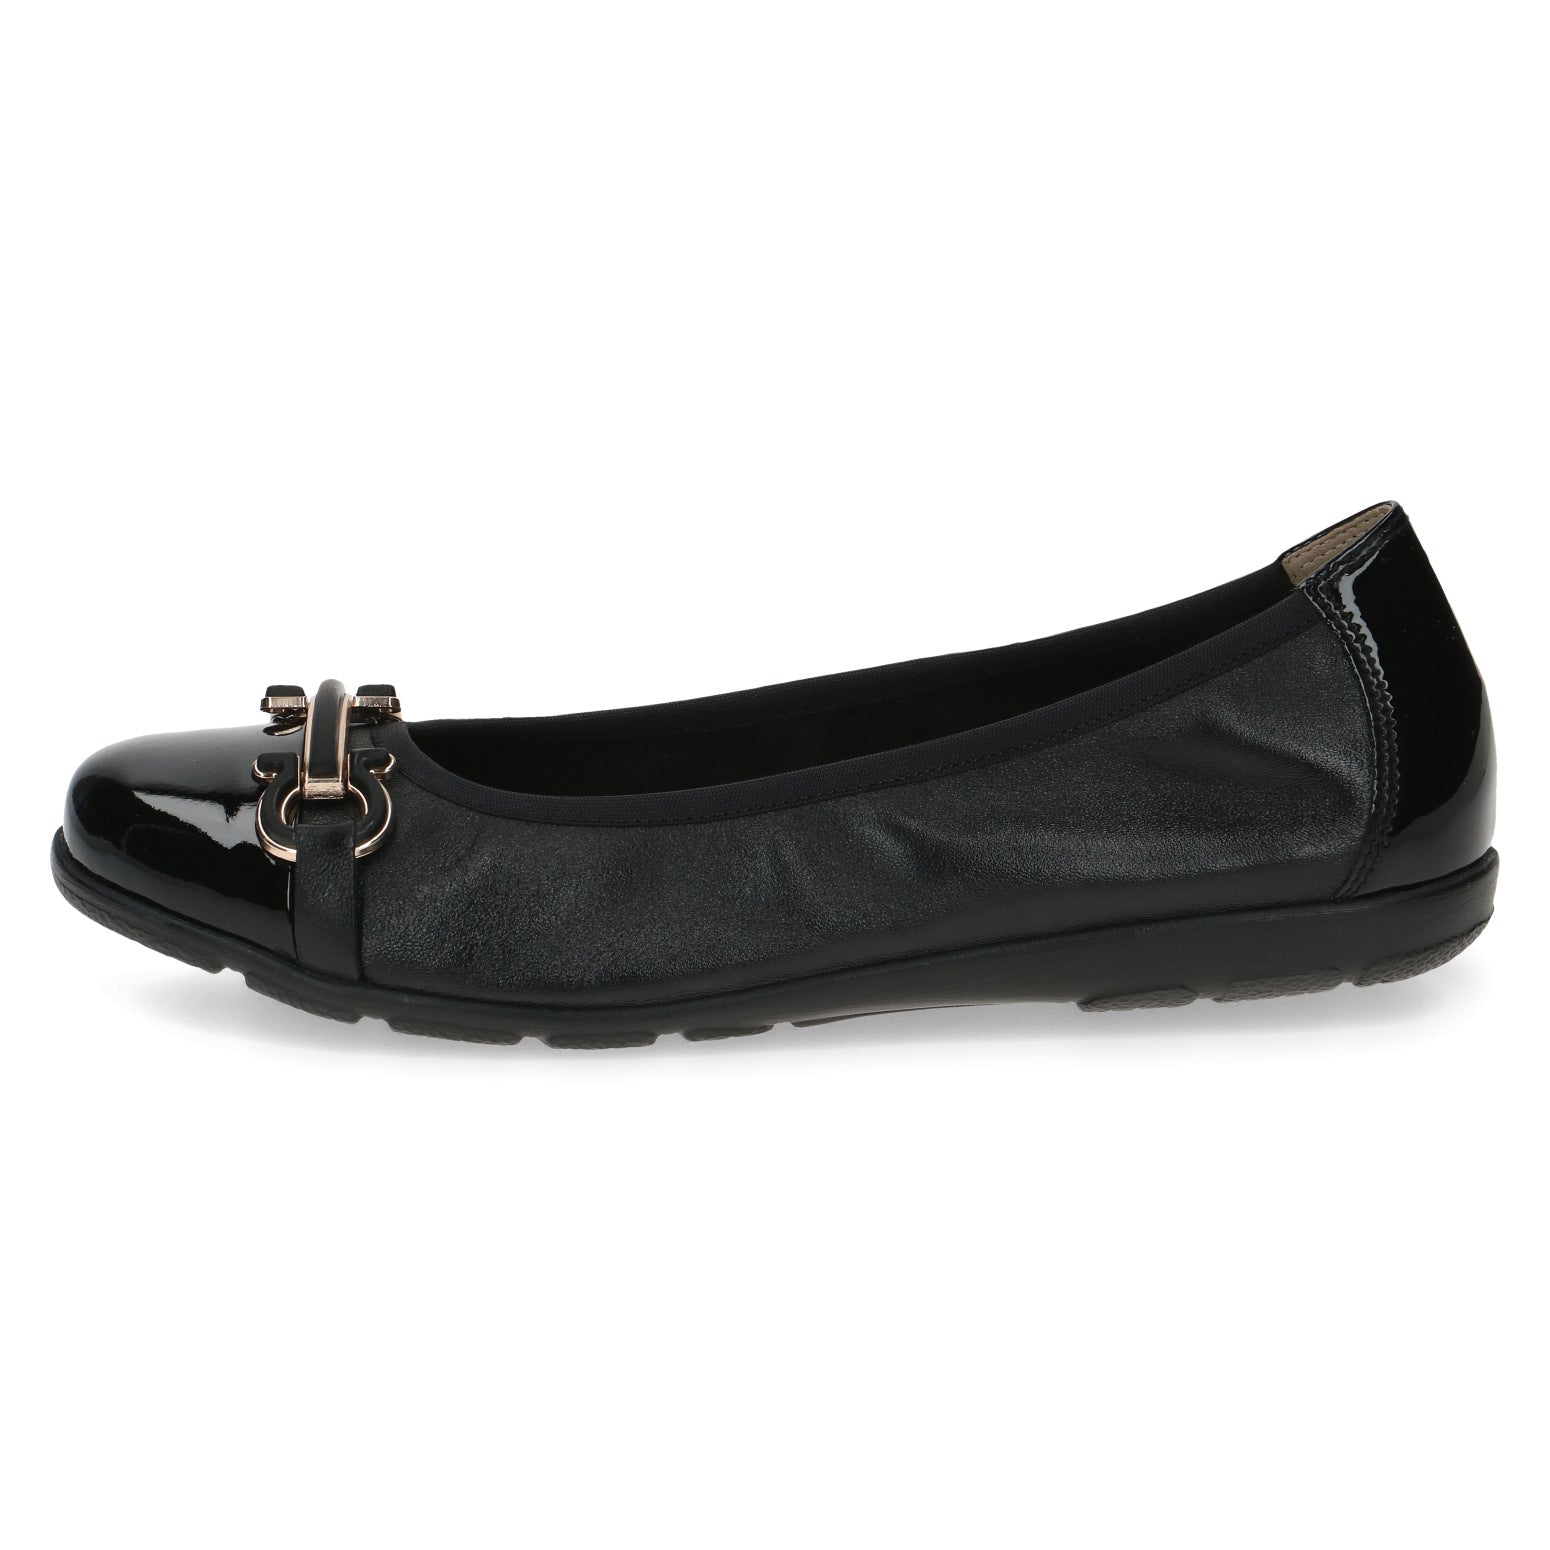 Caprice Black Pump with Buckle Detail CP1